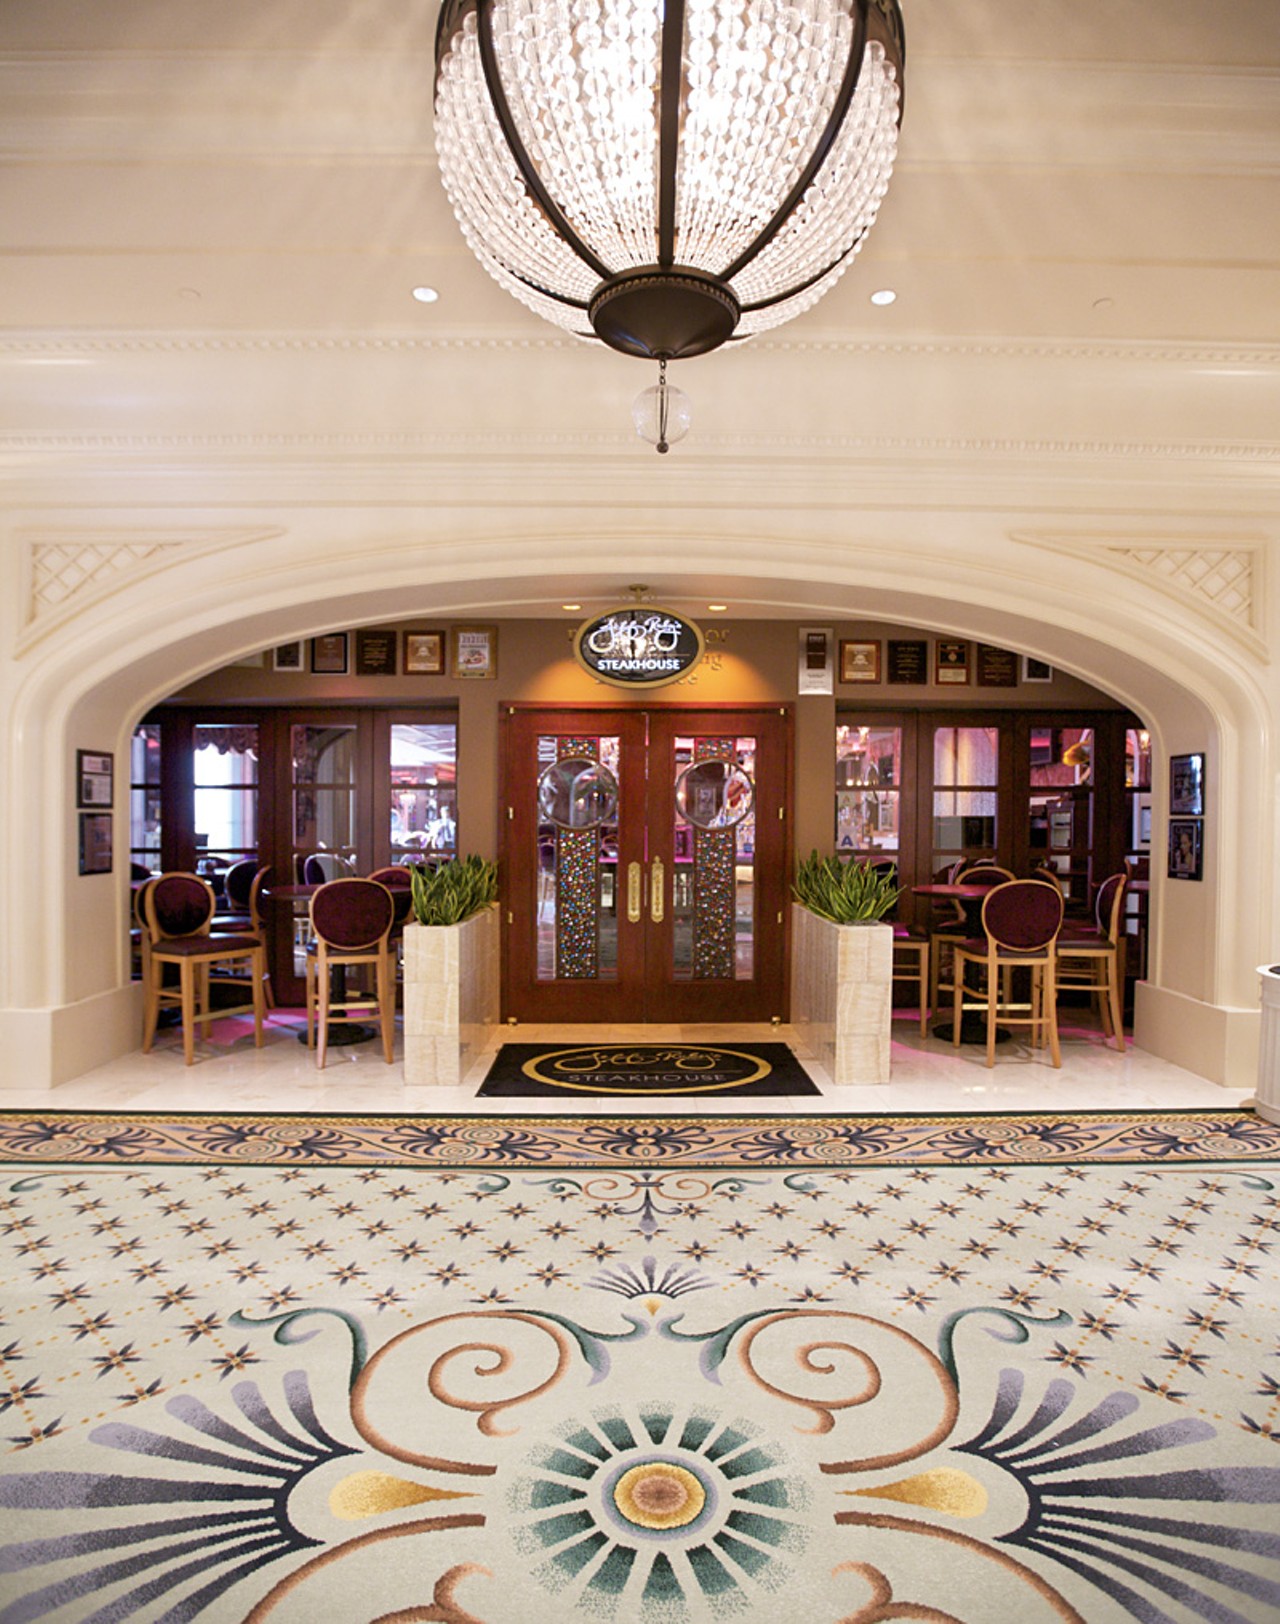 The entrance to Jeff Ruby's from inside the casino. The restaurant is on the north side of the complex.